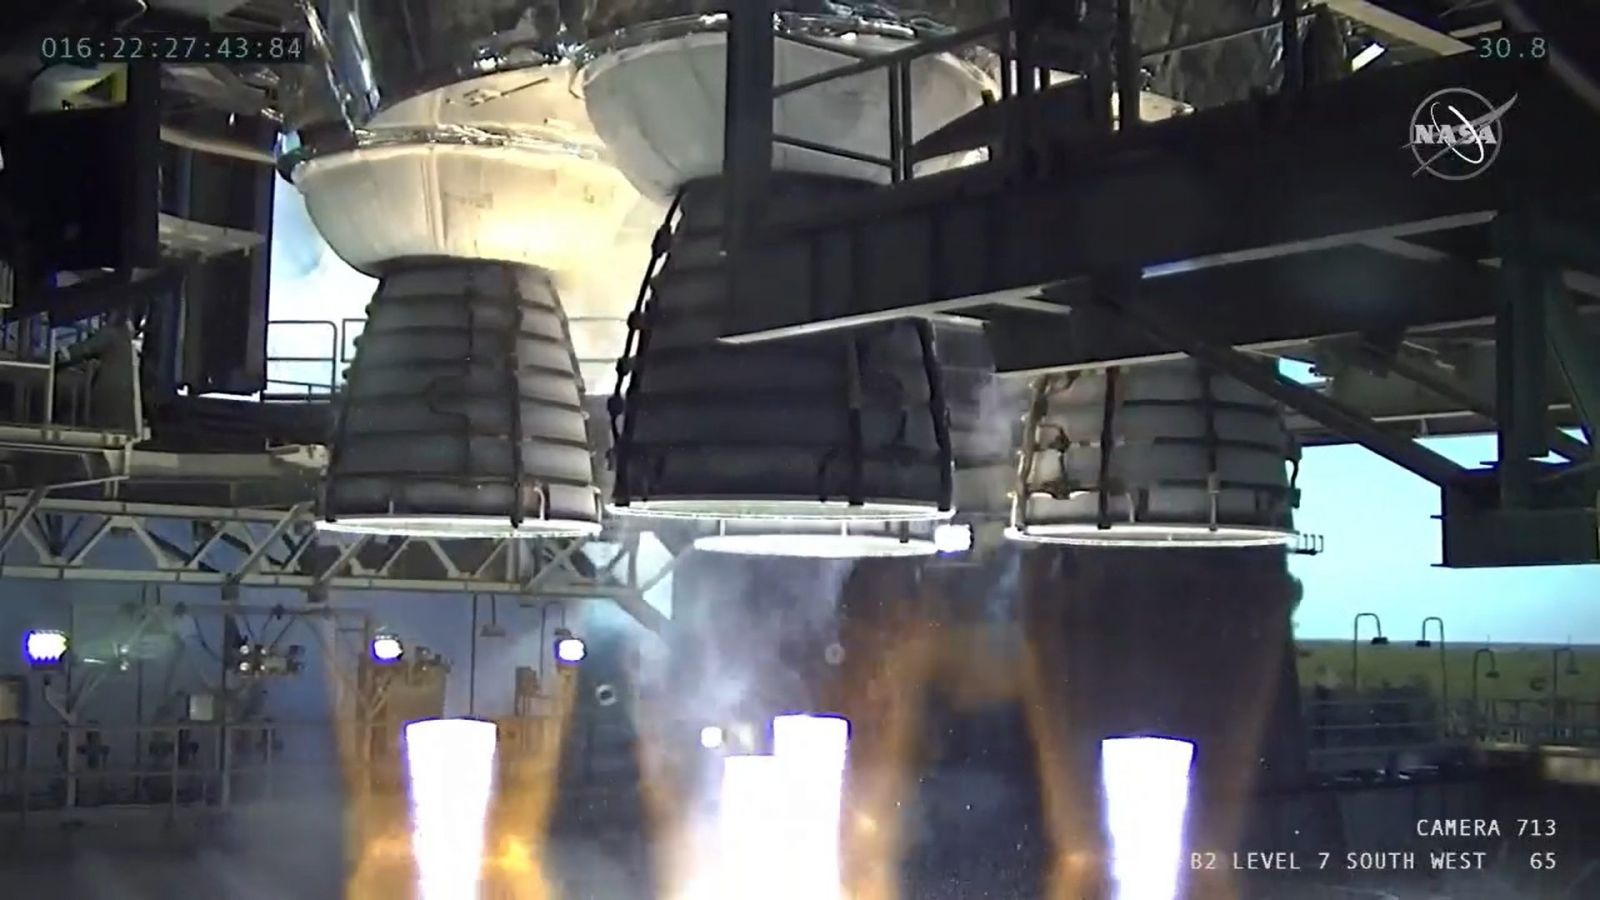 Hot fire test of NASA's SLS Rocket ends prematurely, placing 2021 launch date into question